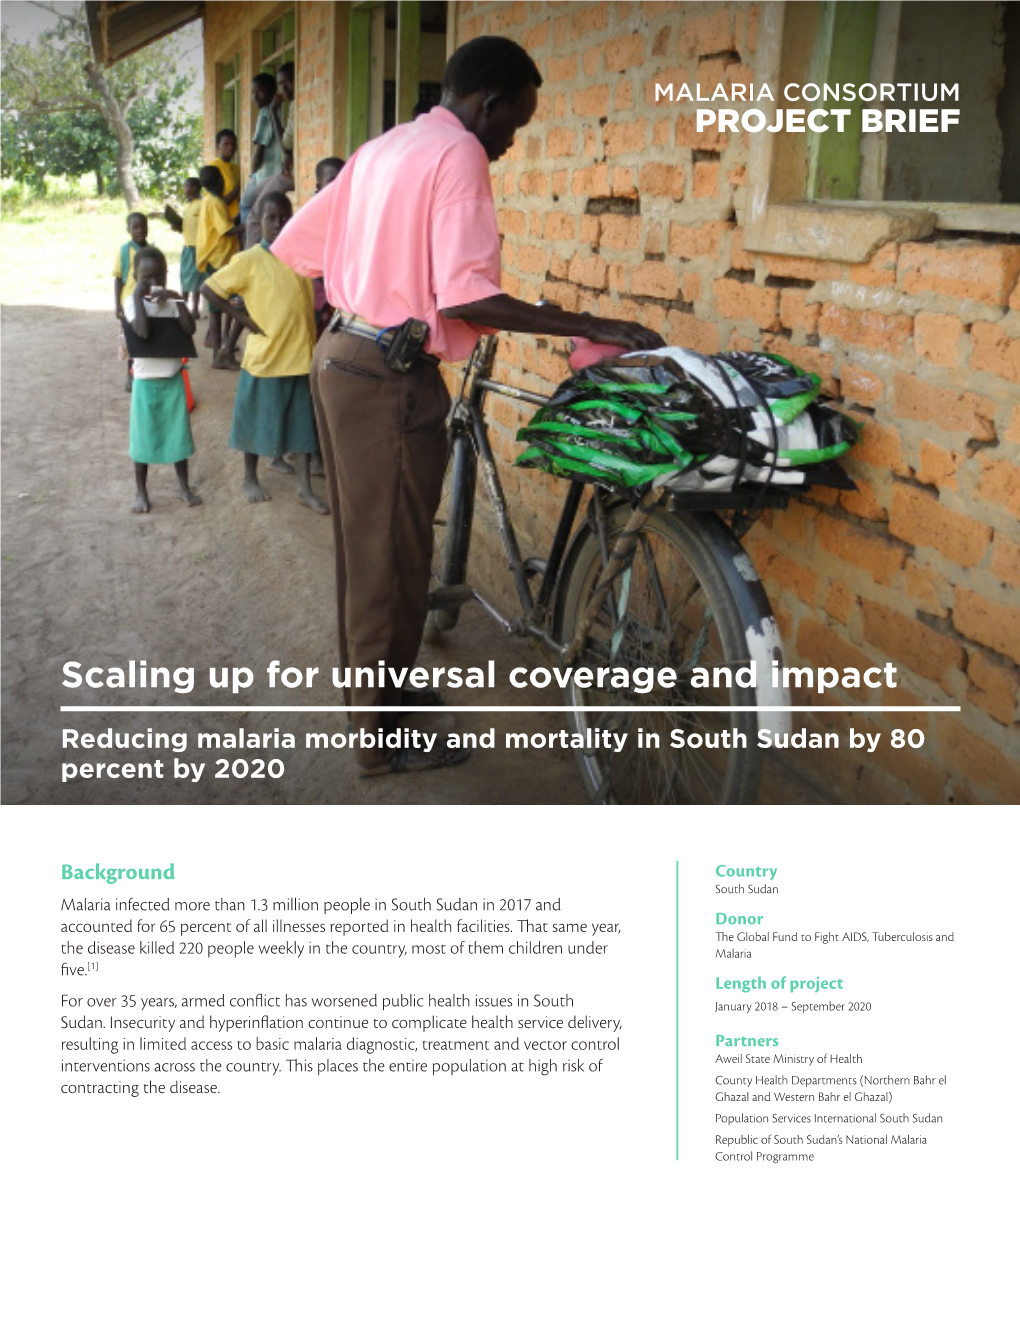 Scaling up for Universal Coverage and Impact